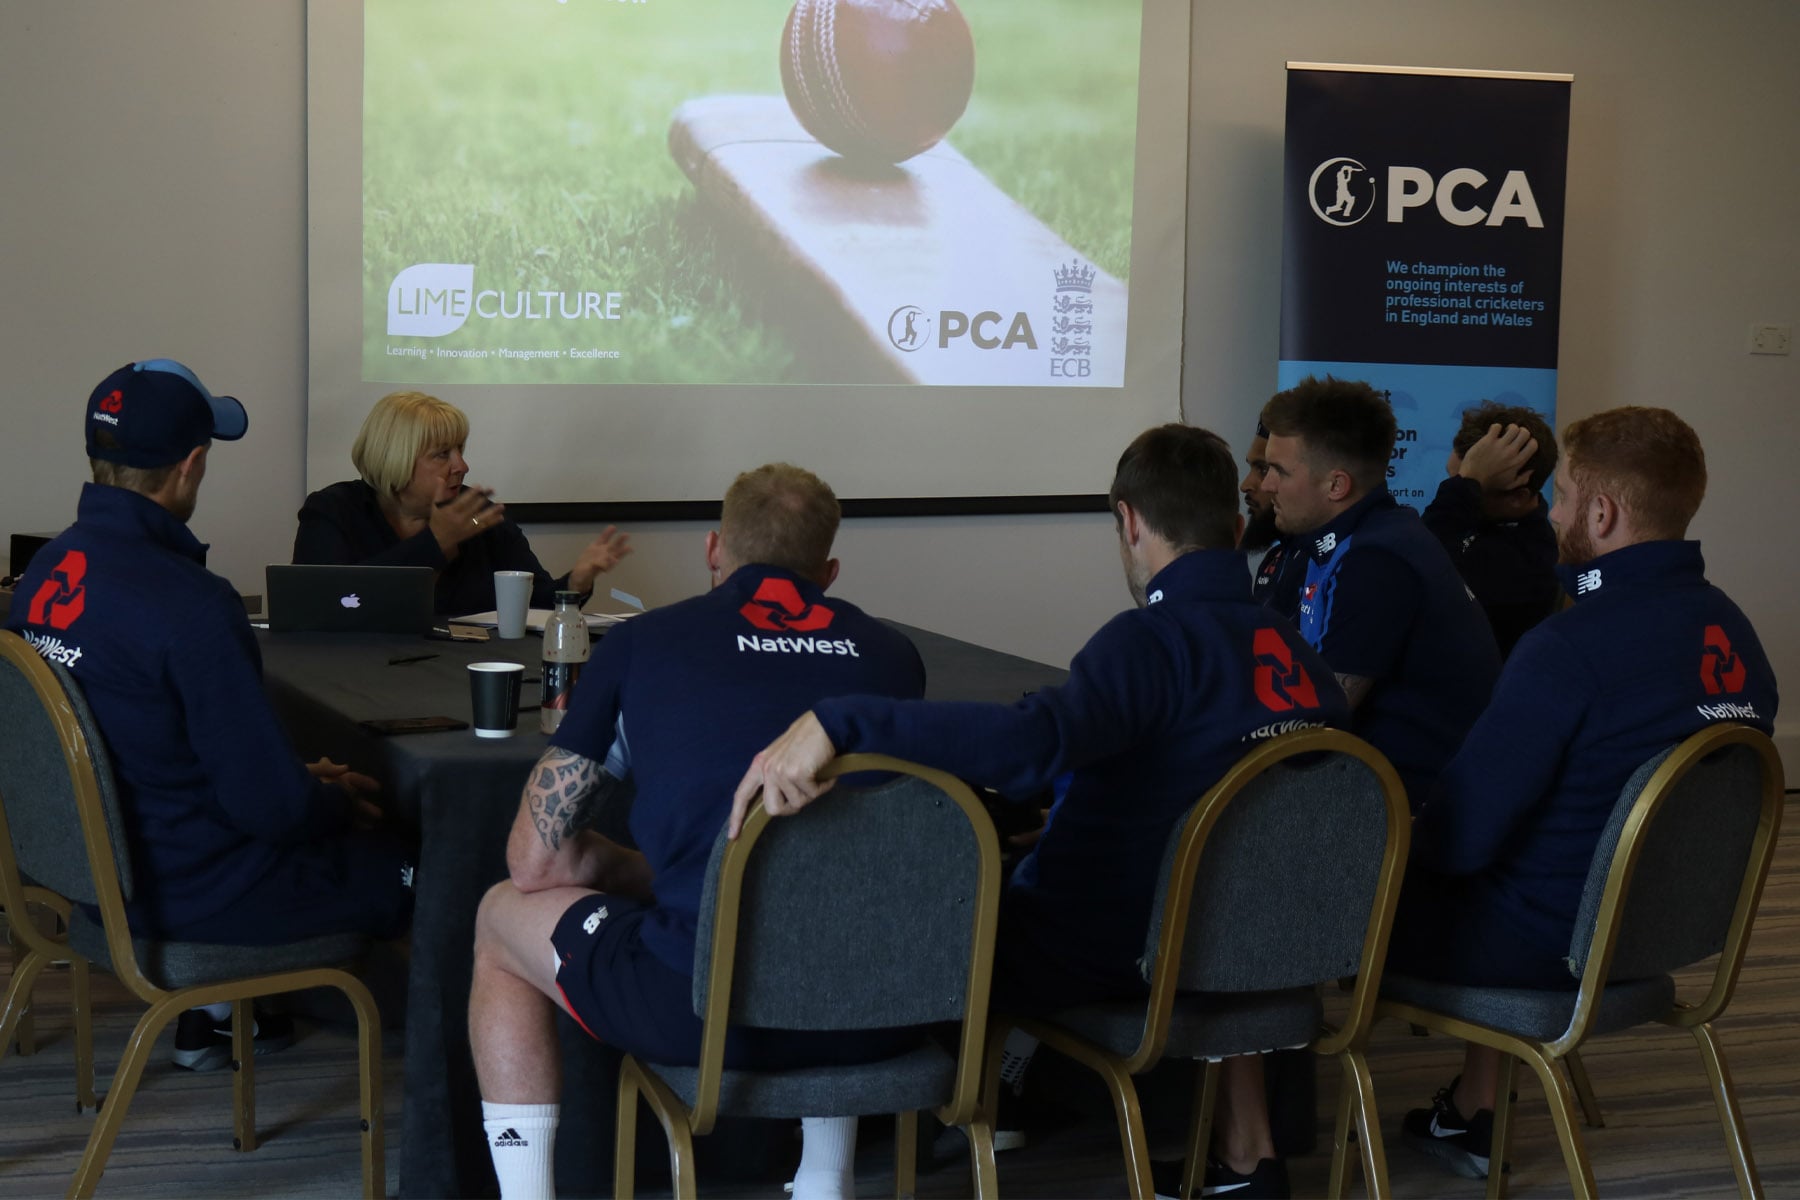 Professional cricket squads receive consent training